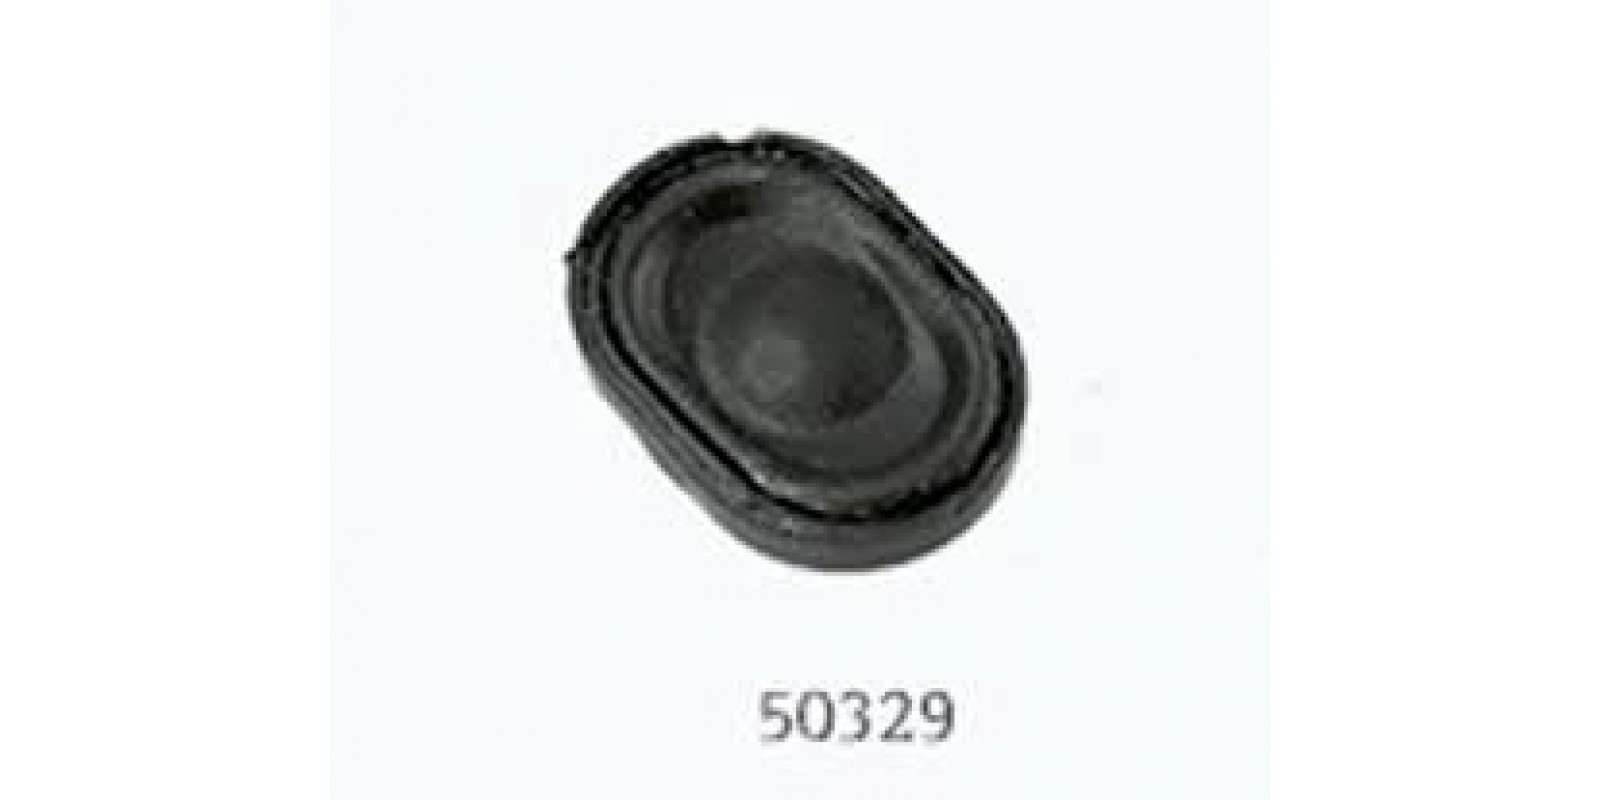 ES50329  	loudspeaker 18mmx10mm, oval, 8 ohms, without sound chamber